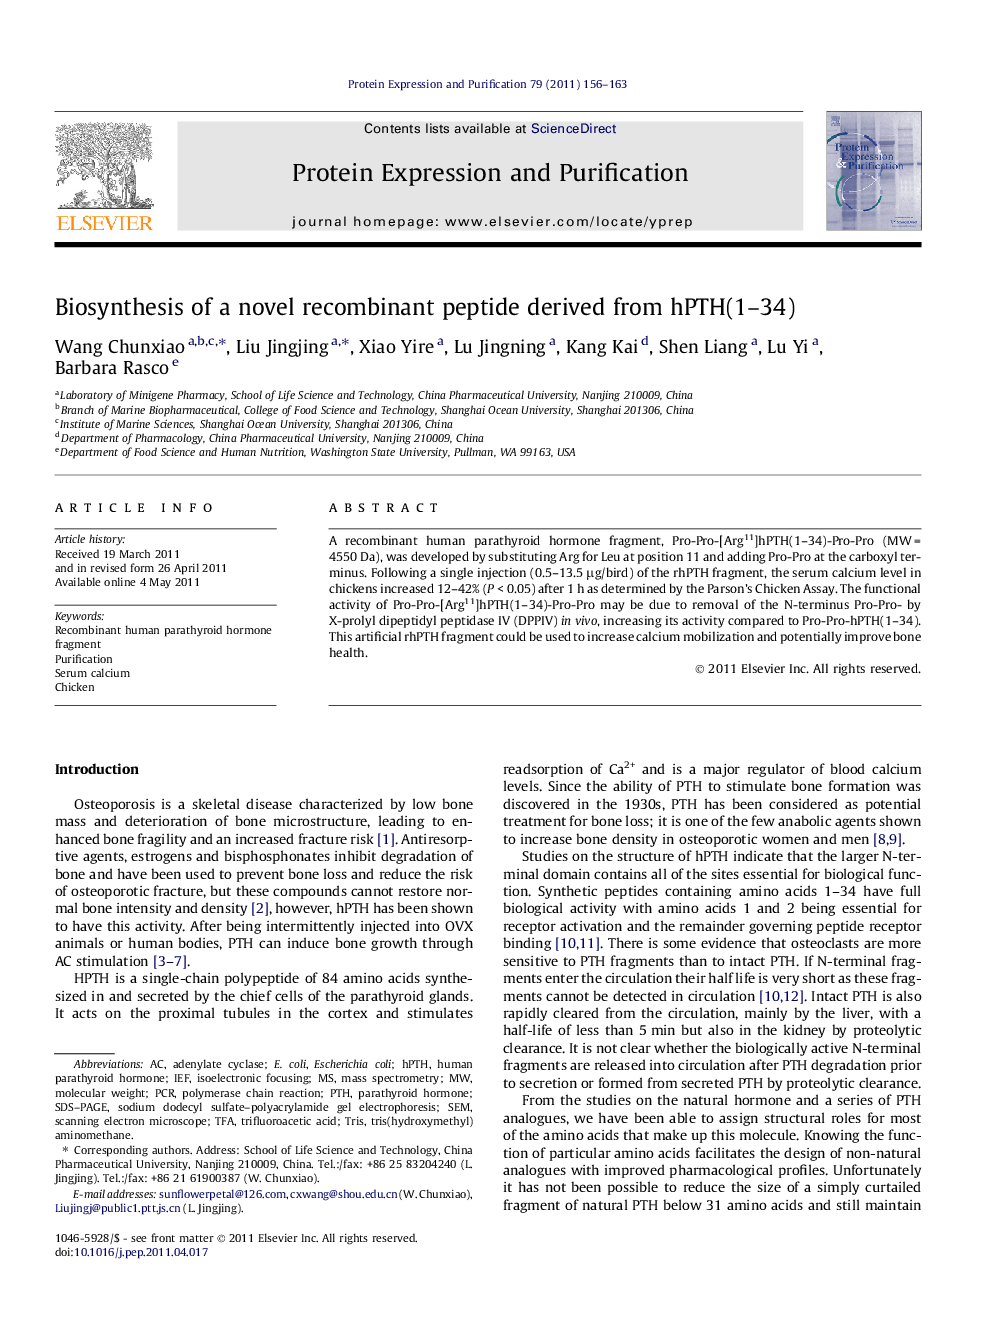 Biosynthesis of a novel recombinant peptide derived from hPTH(1–34)